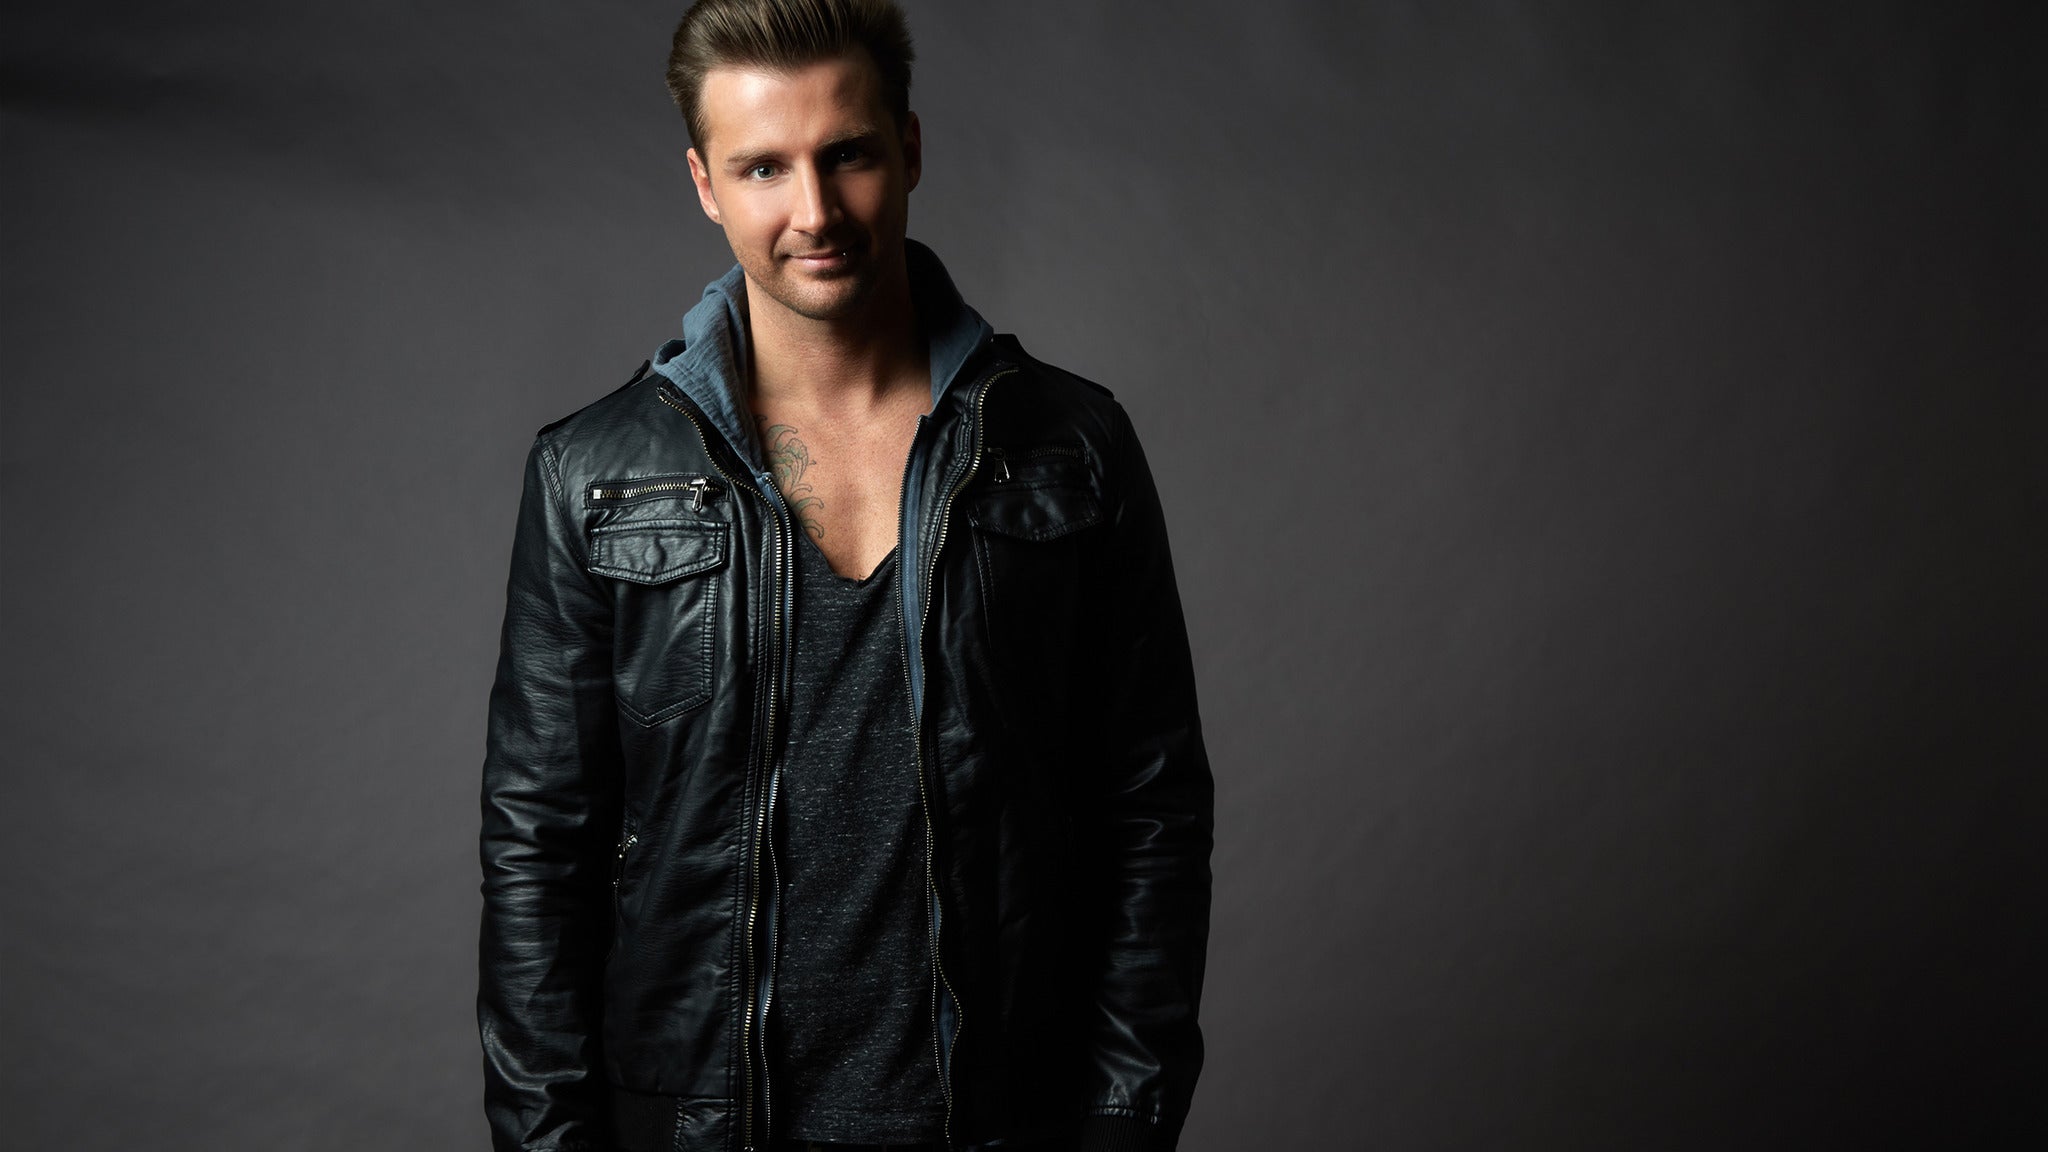 Secondhand Serenade -The Just Because You Sing Loud Tour presale password